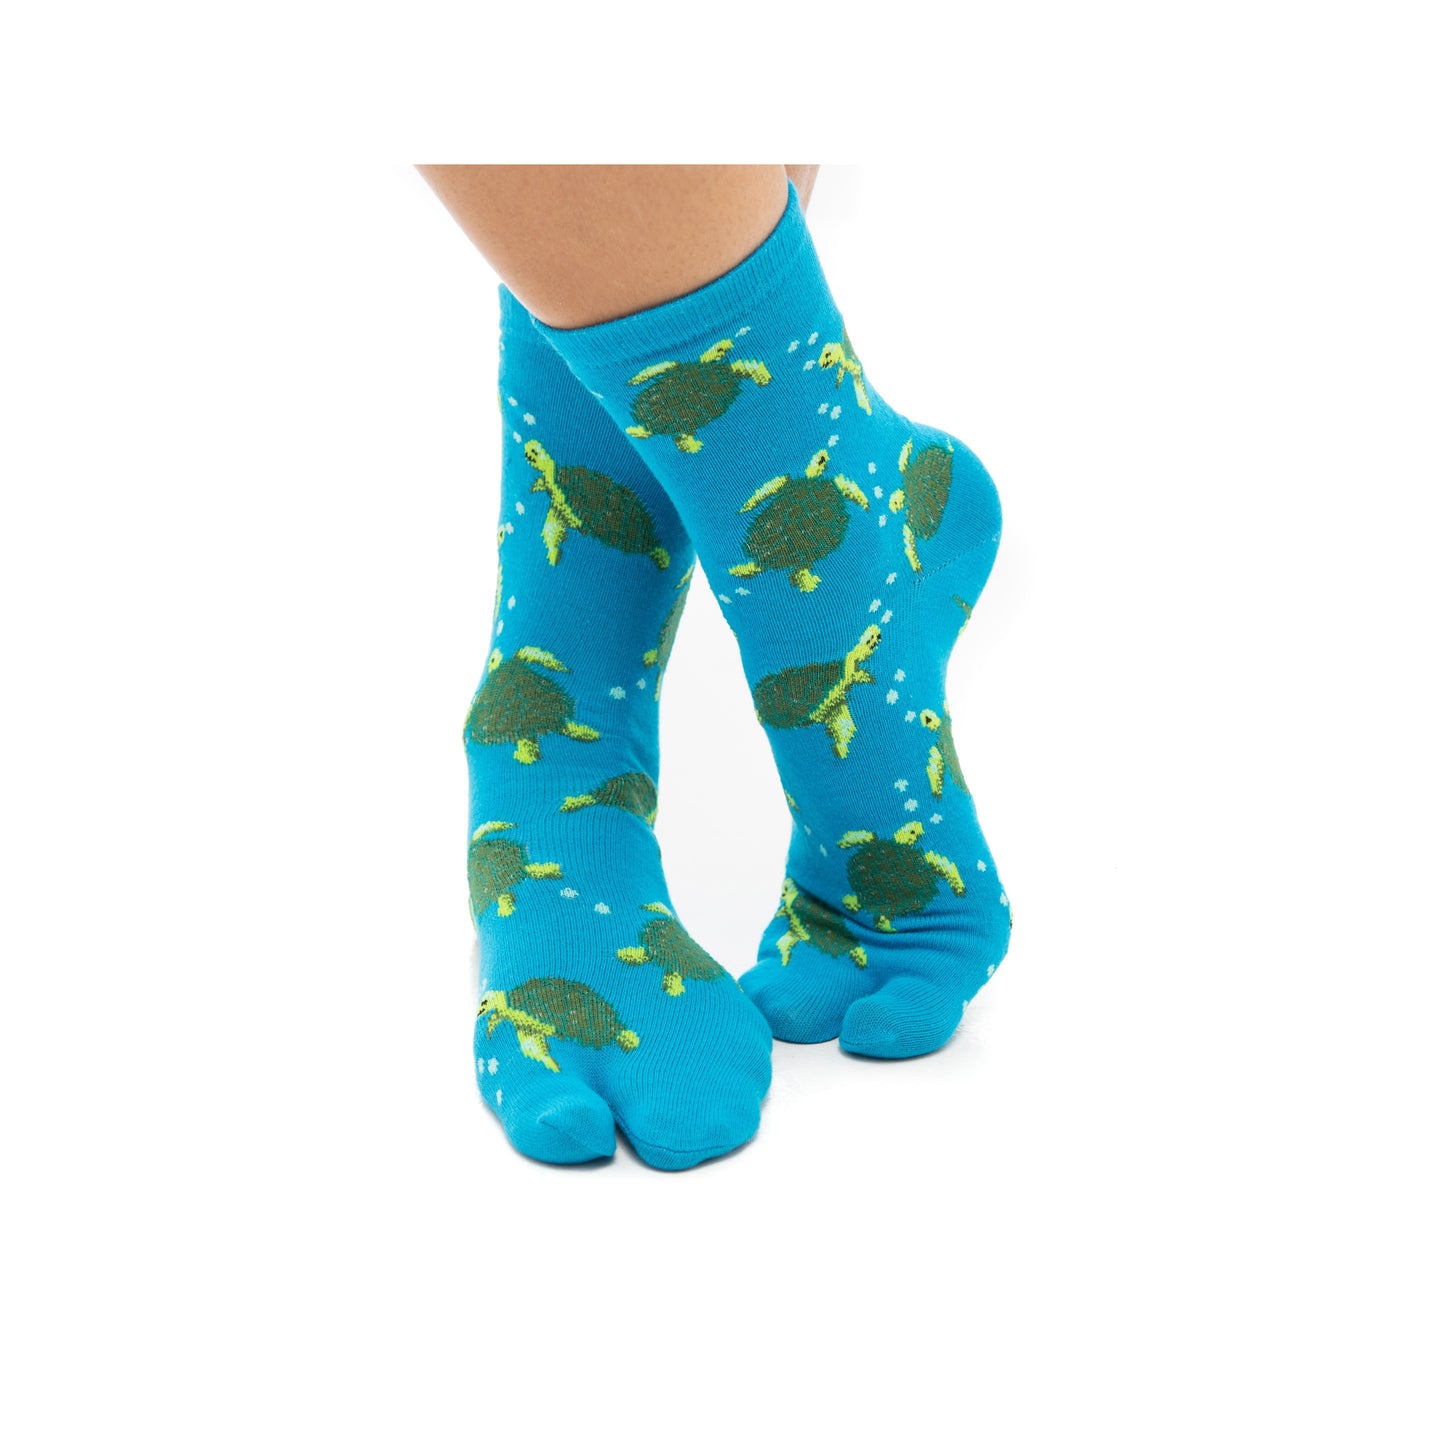 1 Pair - V-Toe Flip Flop Tabi Socks - Turquoise with Green Turtle